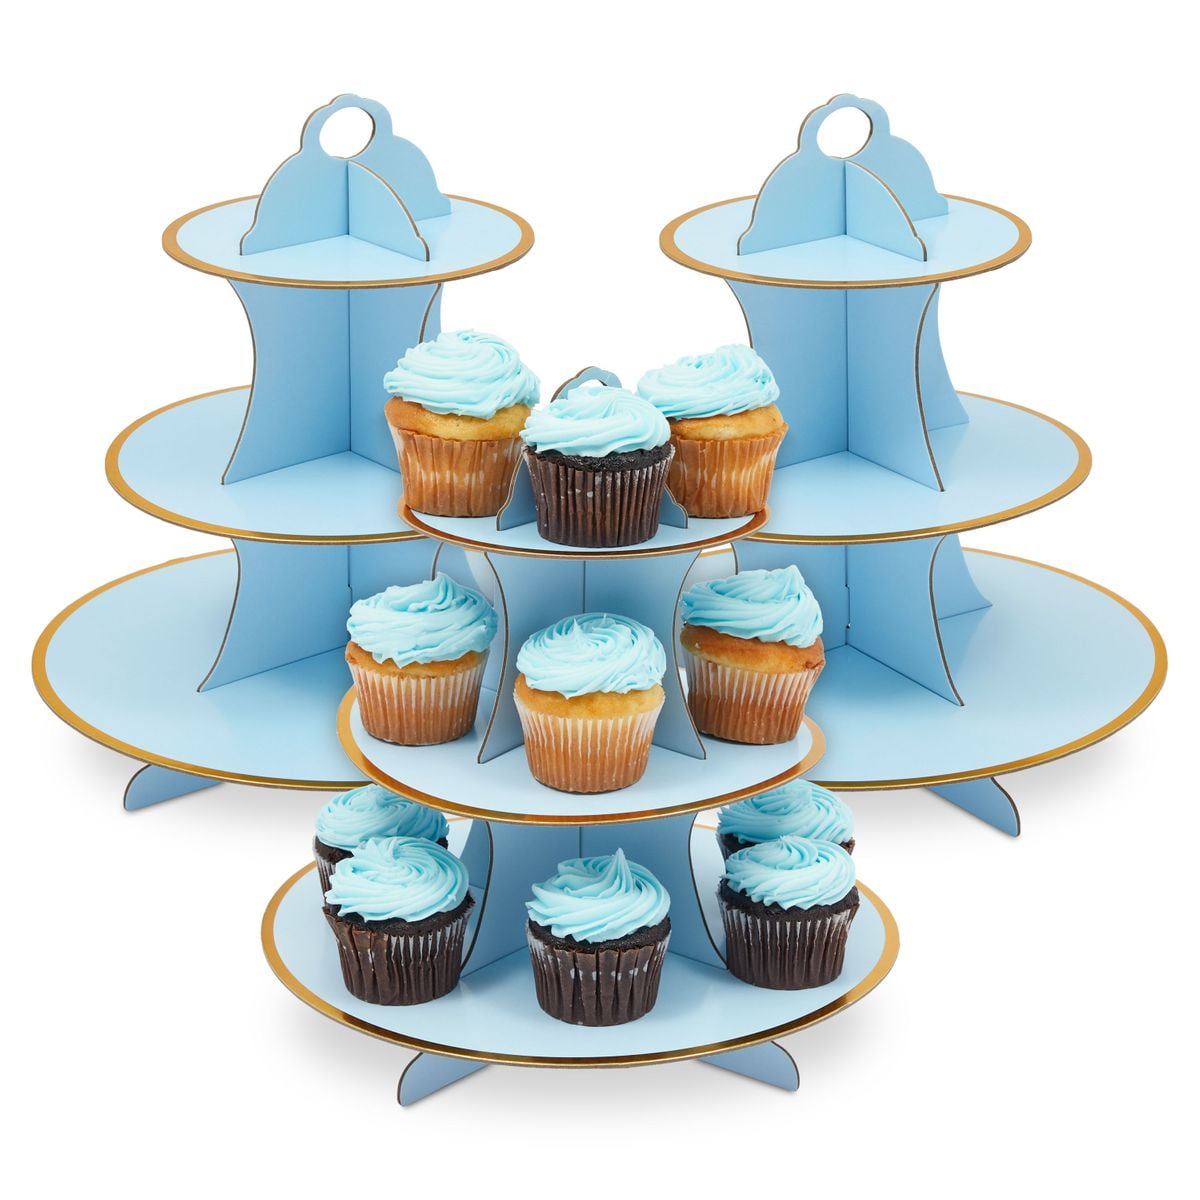 12" Black Cake Stand 3 Tier Square Cupcake Tree Party Deco Wedding Baby Shower 